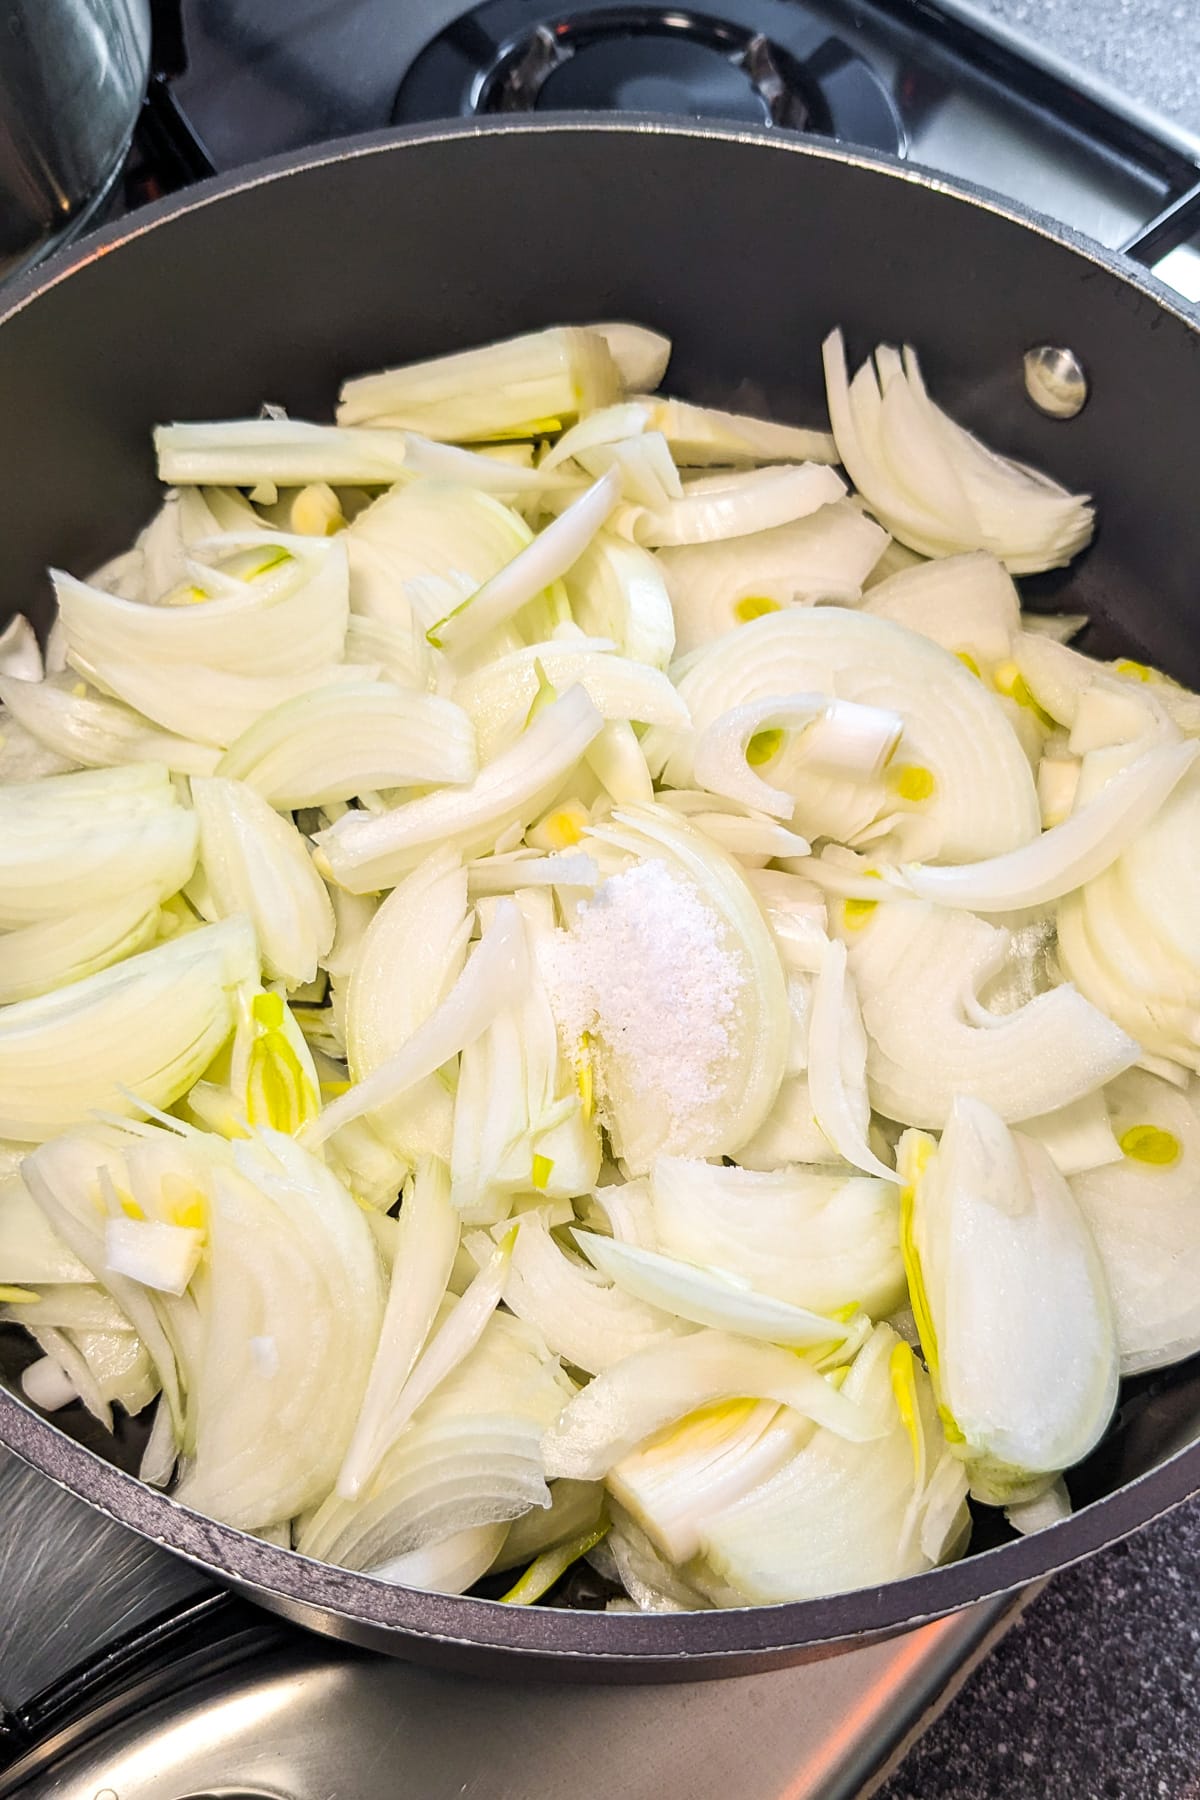 Sliced onions with salt in a frying pan on the stove.